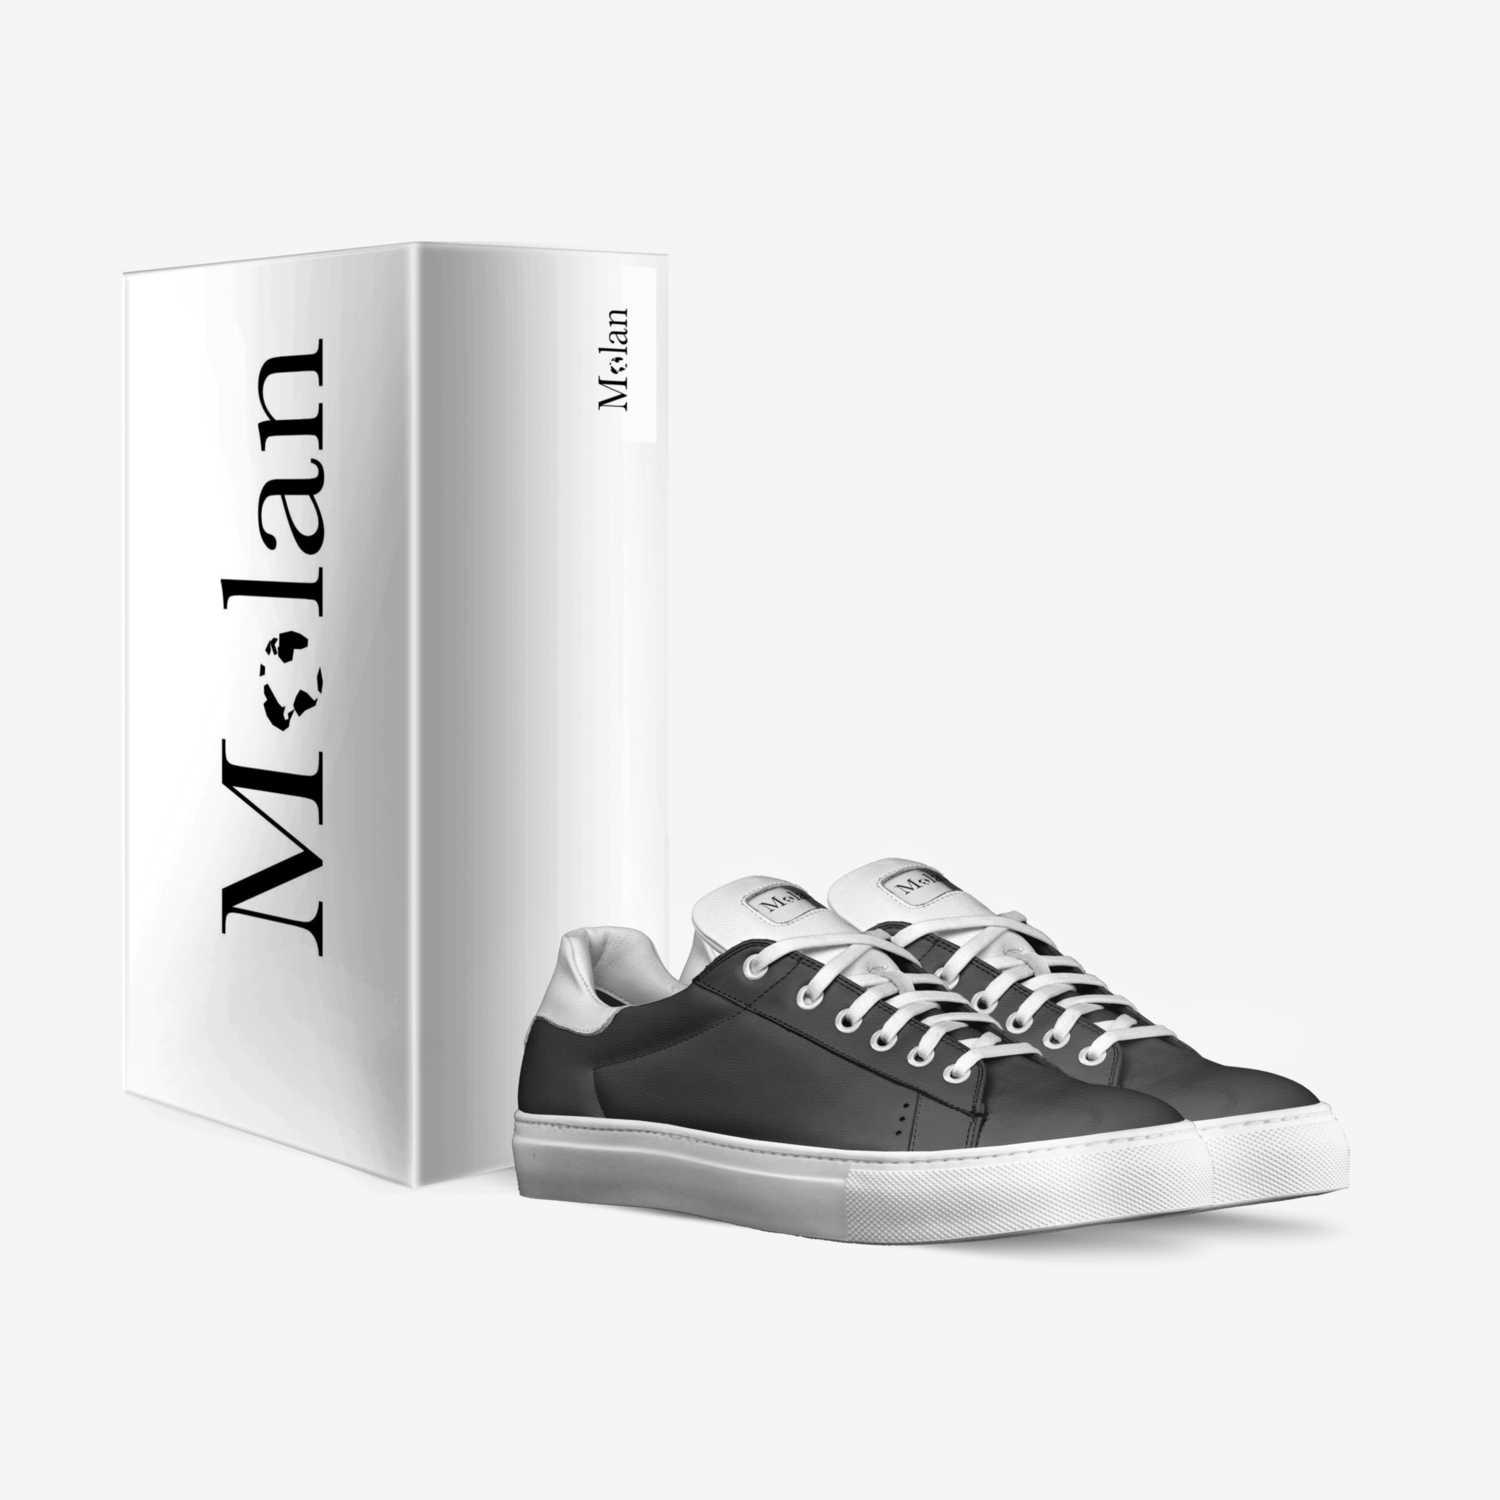 molan custom made in Italy shoes by Mathias | Box view